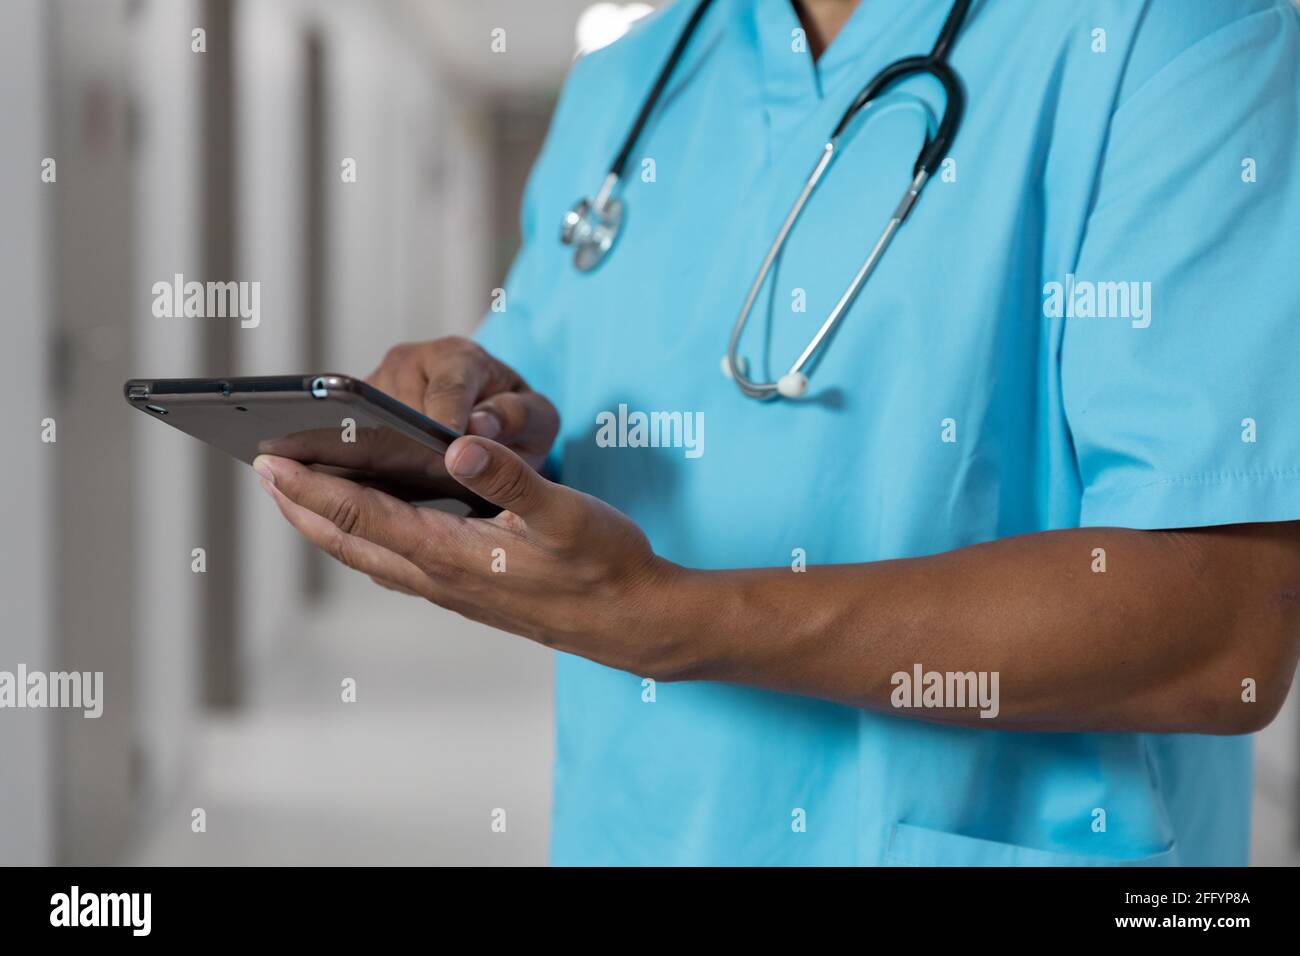 Midsection of mixes race male doctor standing in corridor using tablet Stock Photo